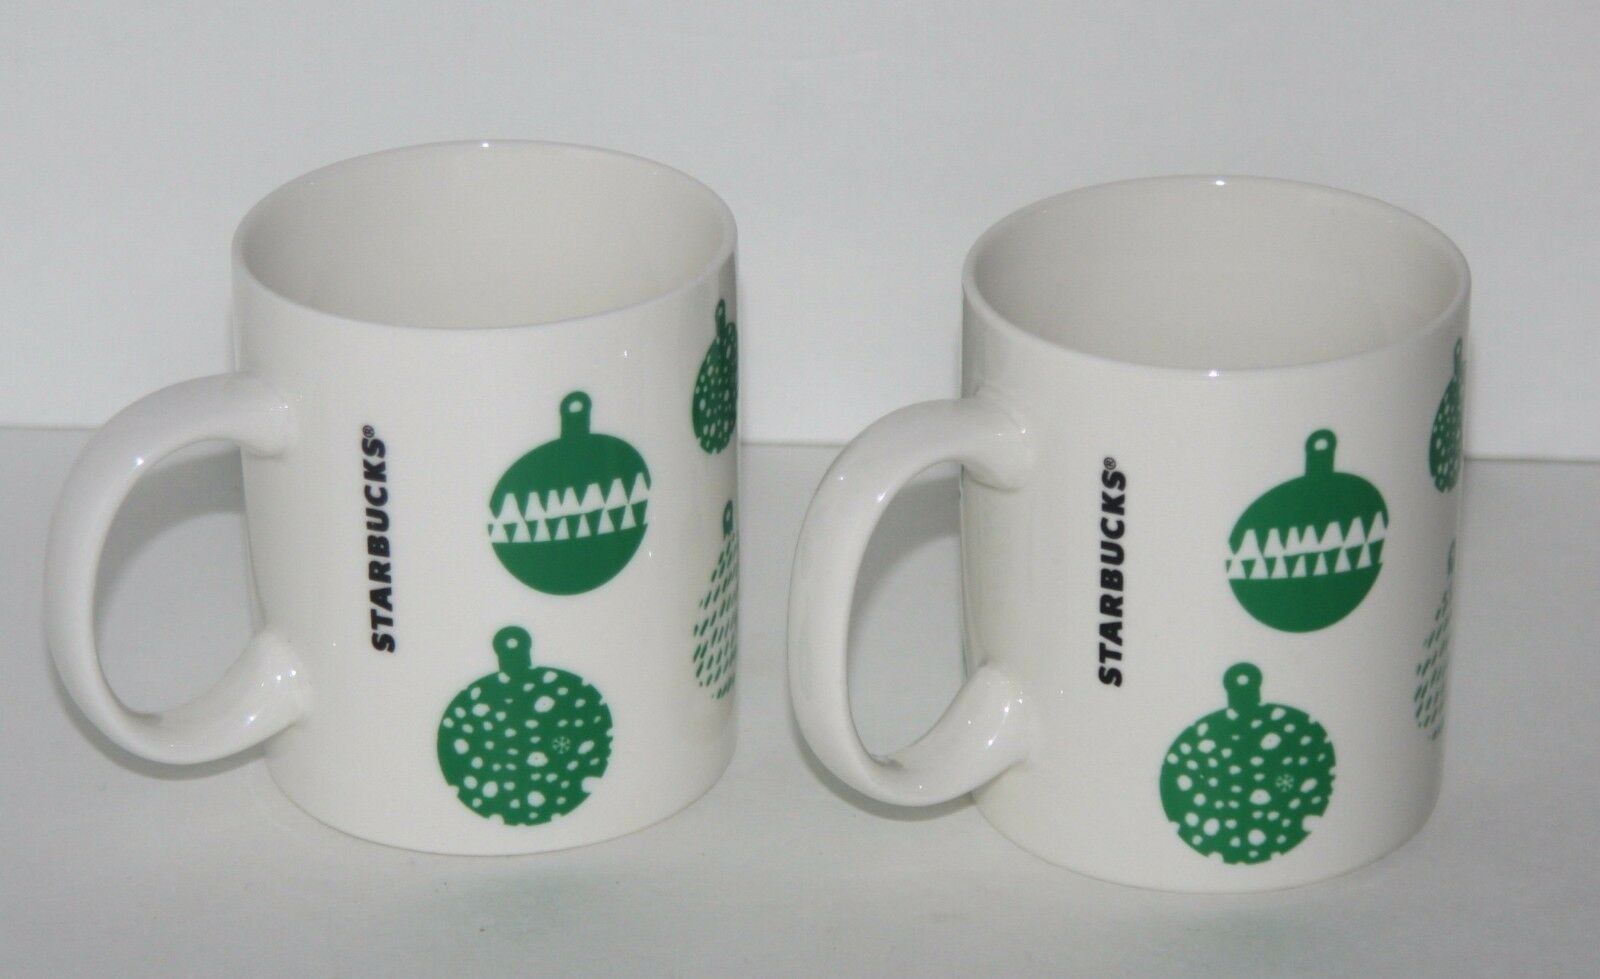 What Is The Most Valuable Starbucks Mug